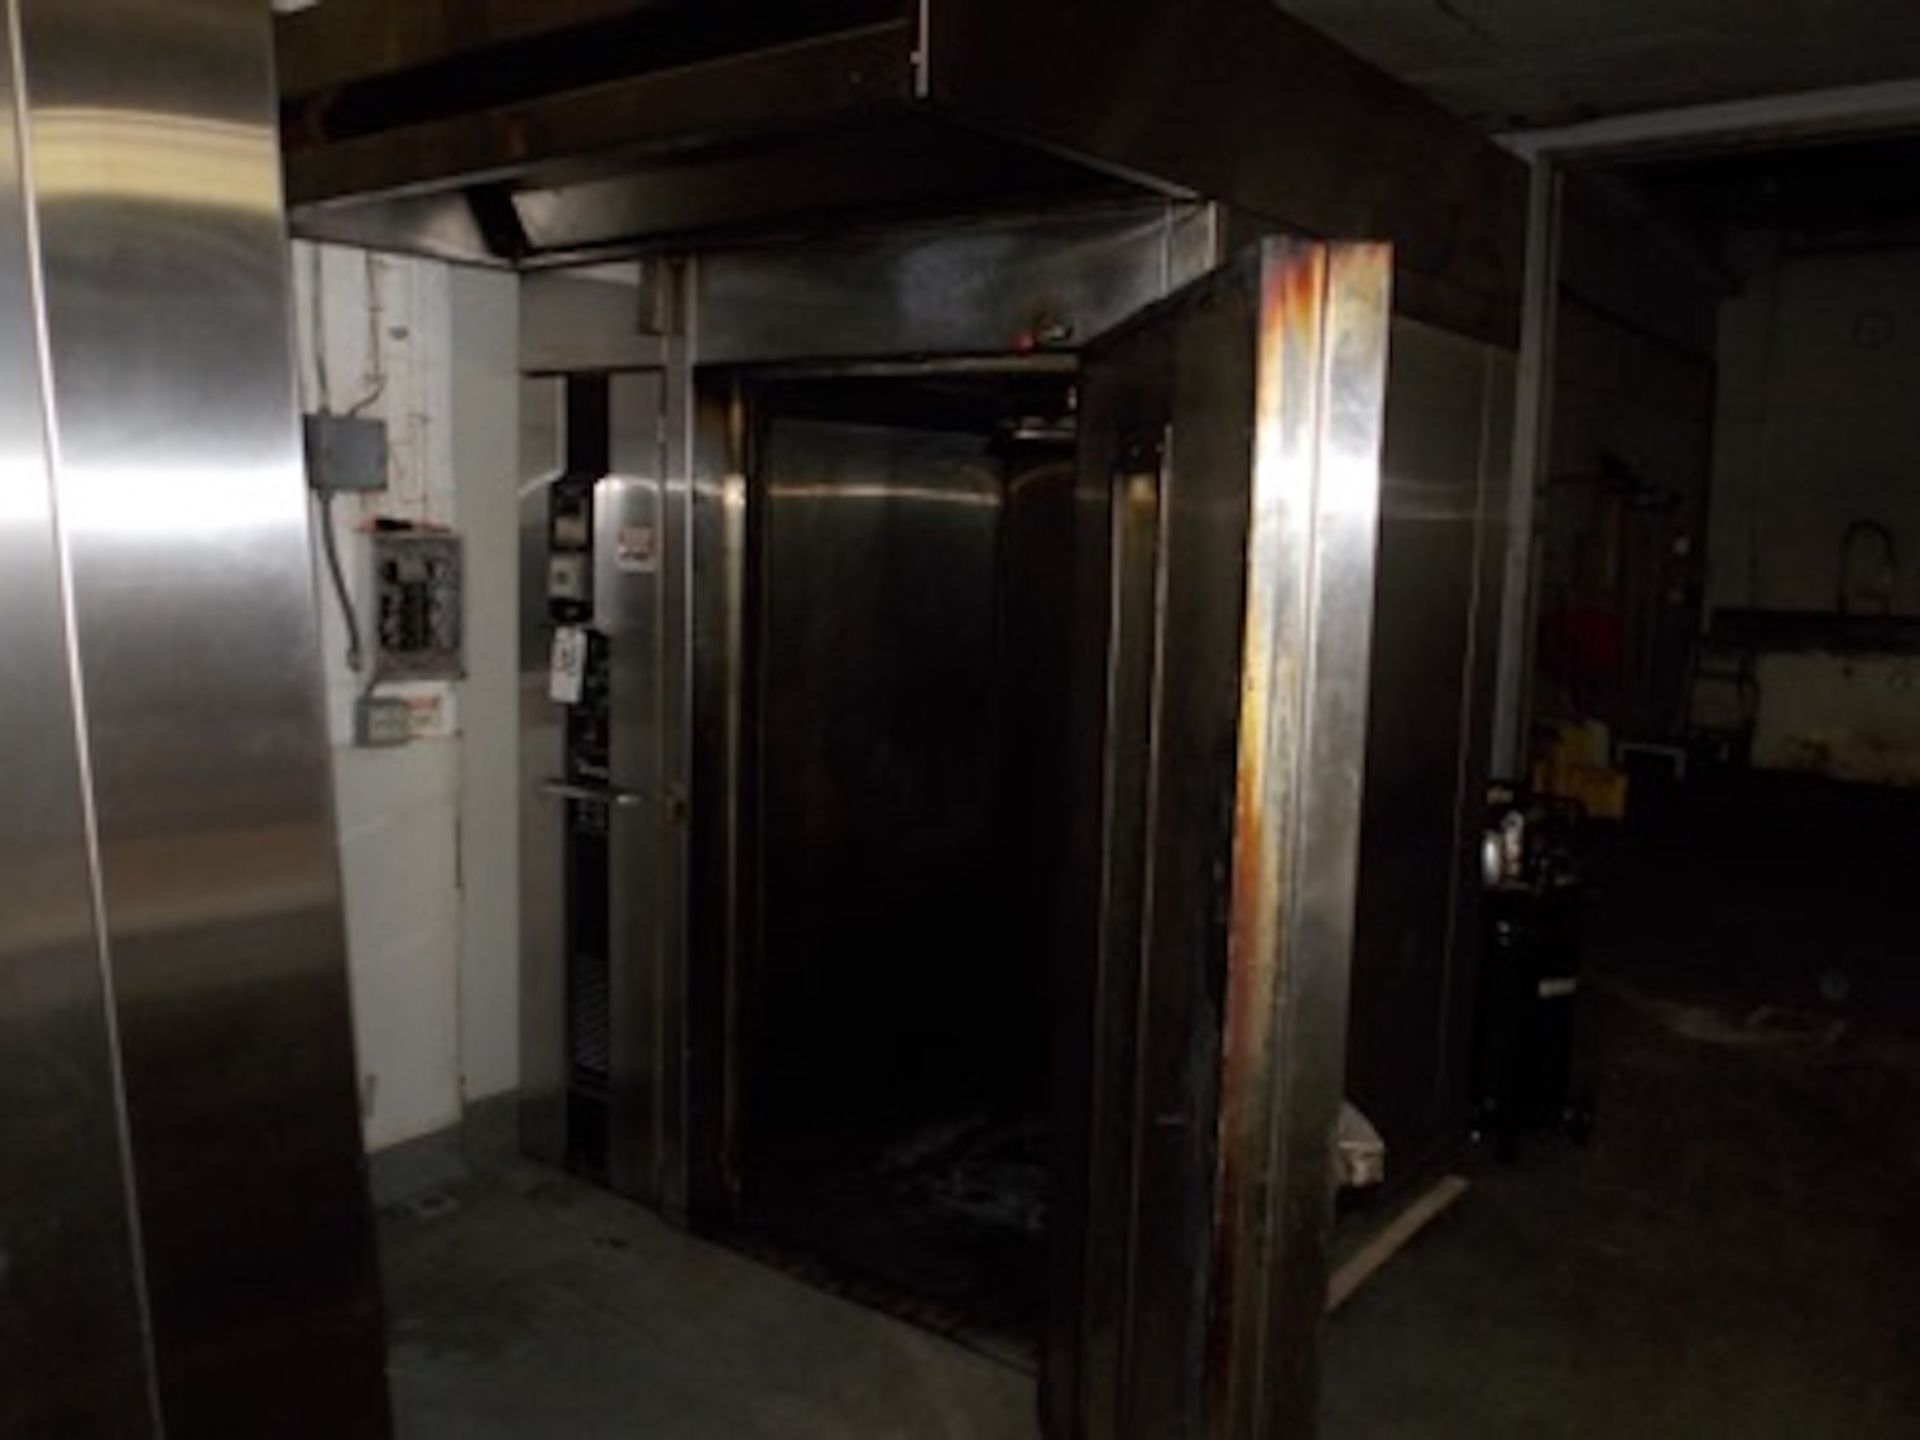 Baxter Rotary Rack Gas Oven 4'x4'x6'Tall Inside Size, 8'x6'x8.5' Tall Outside Size, mod. OV210G-M2B, - Image 4 of 6